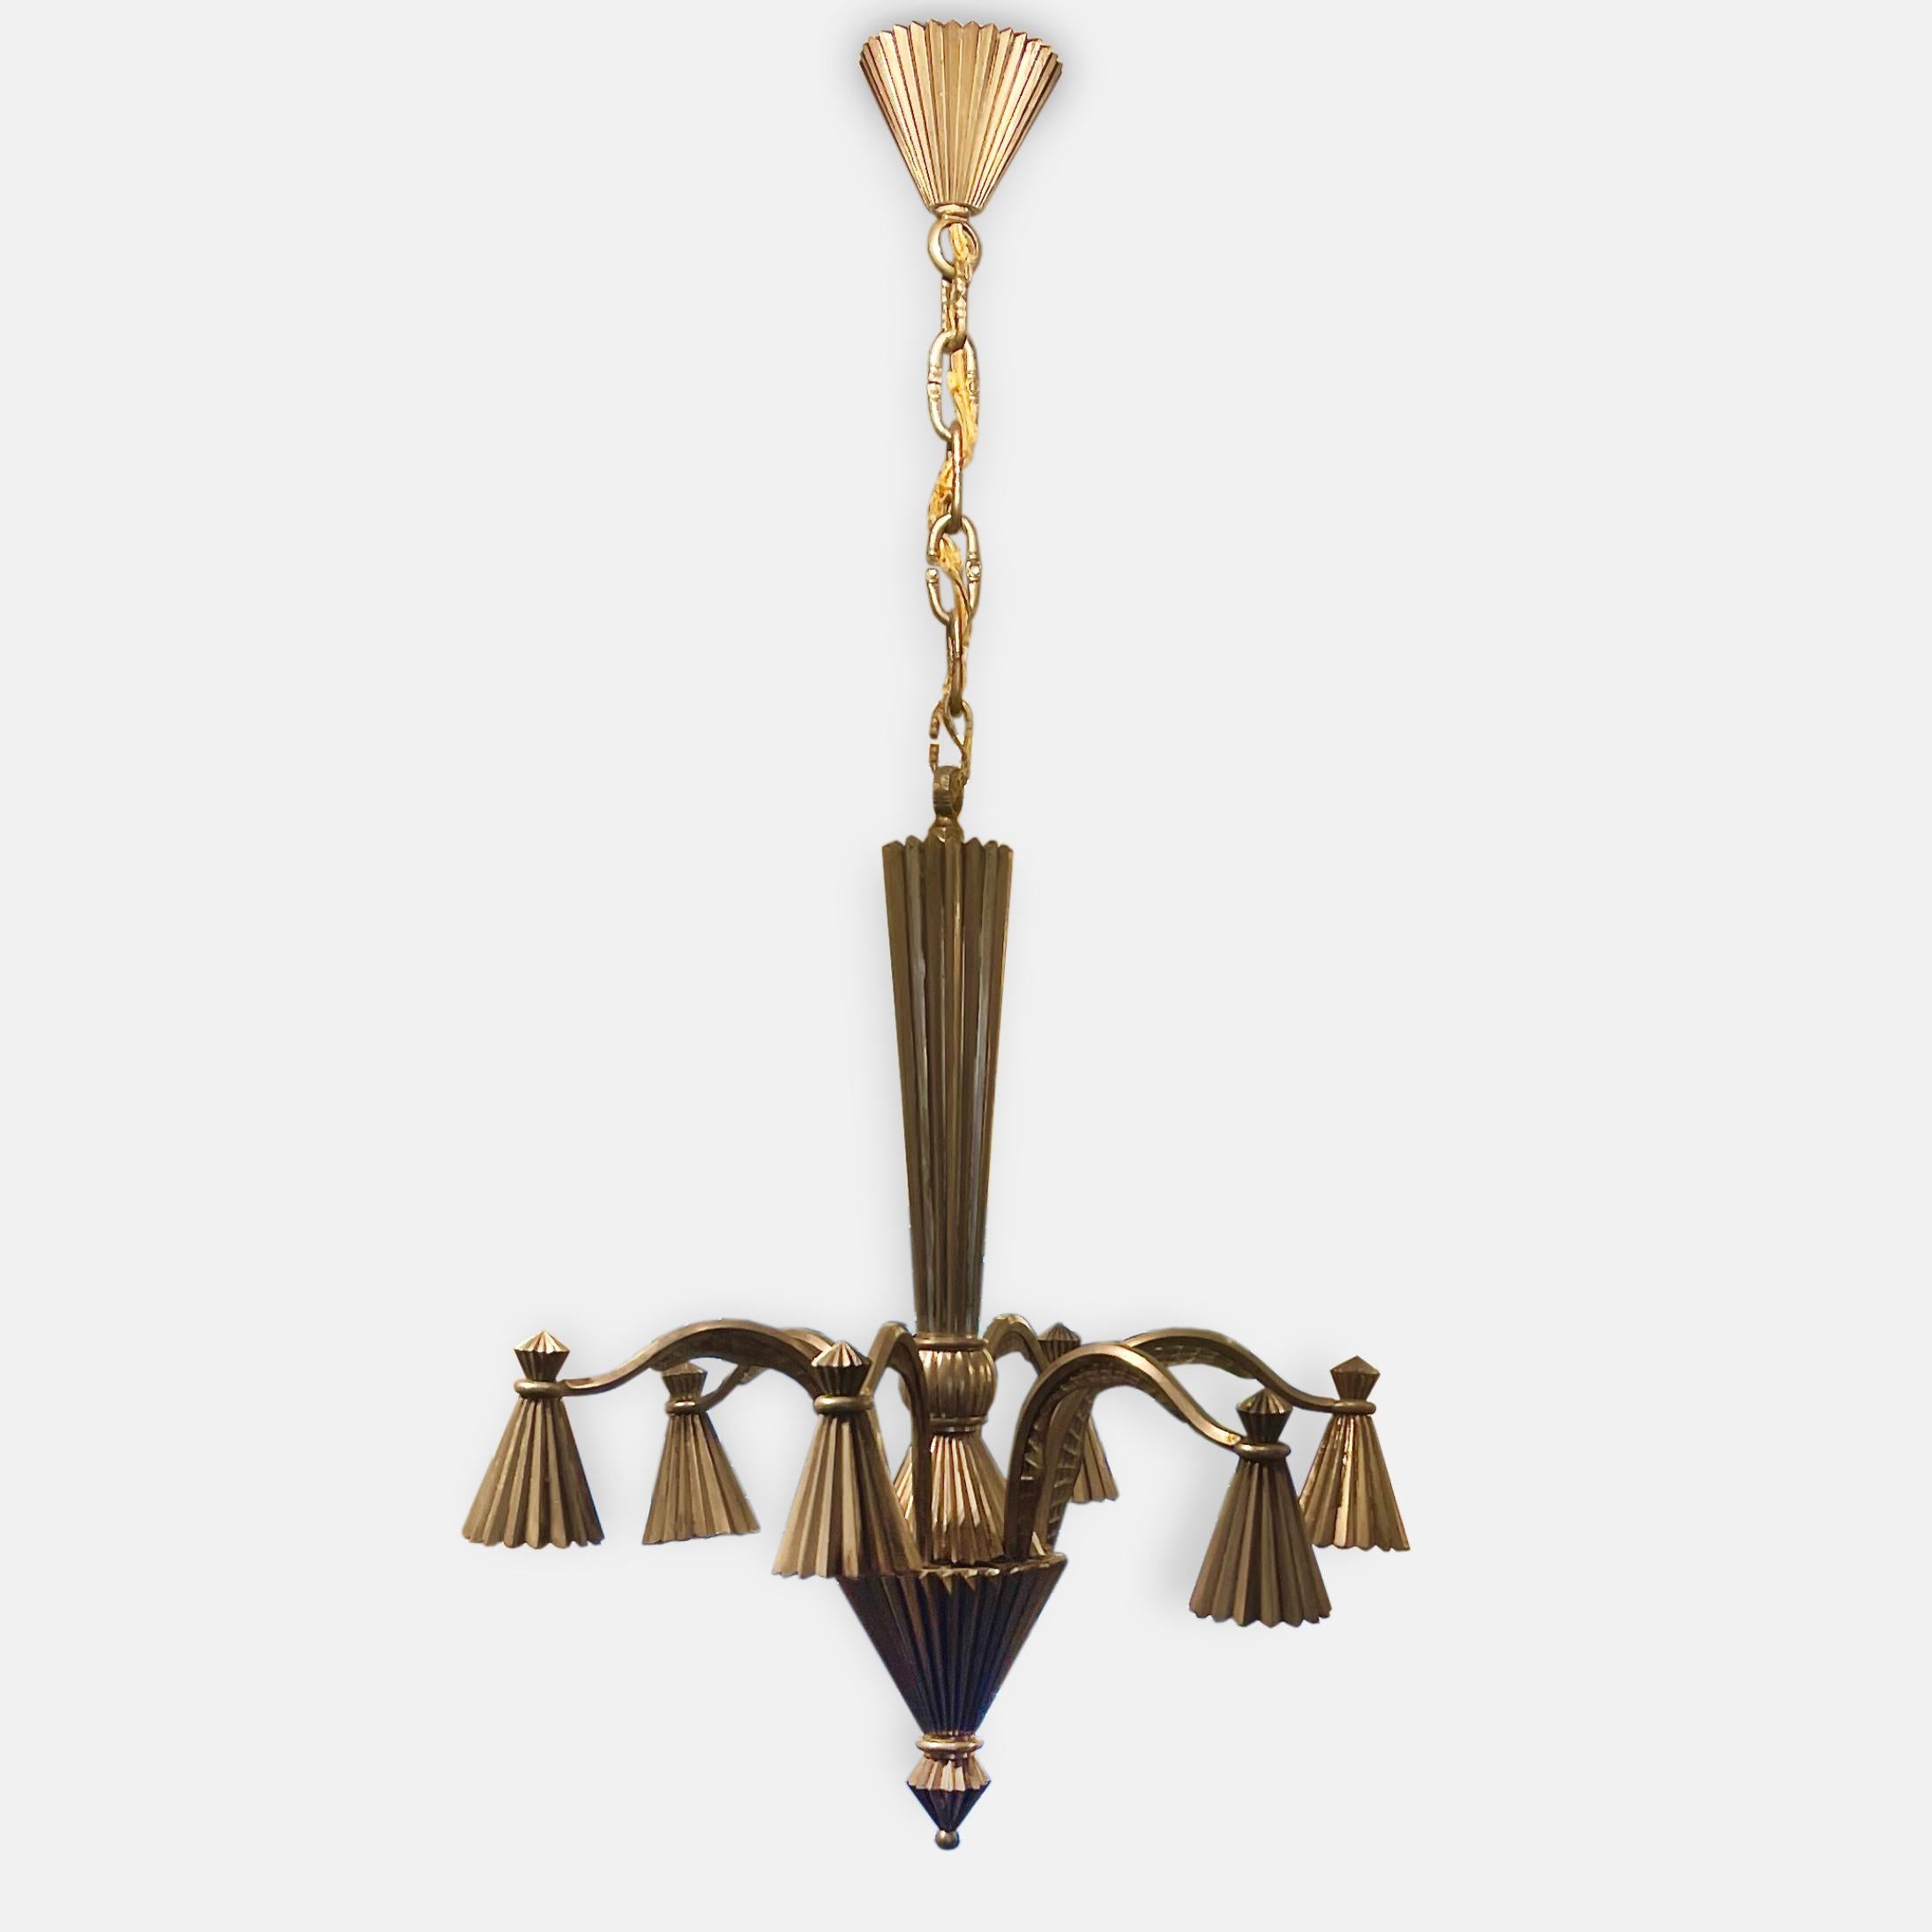 “Dagobert Peche was the greatest ornamental genius Austria has produced since the Baroque” - Josef Hoffmann

With the striking presence of this six-armed steel chandelier by Dagobert Peche, blending the dramatic embellishment of the Baroque with the